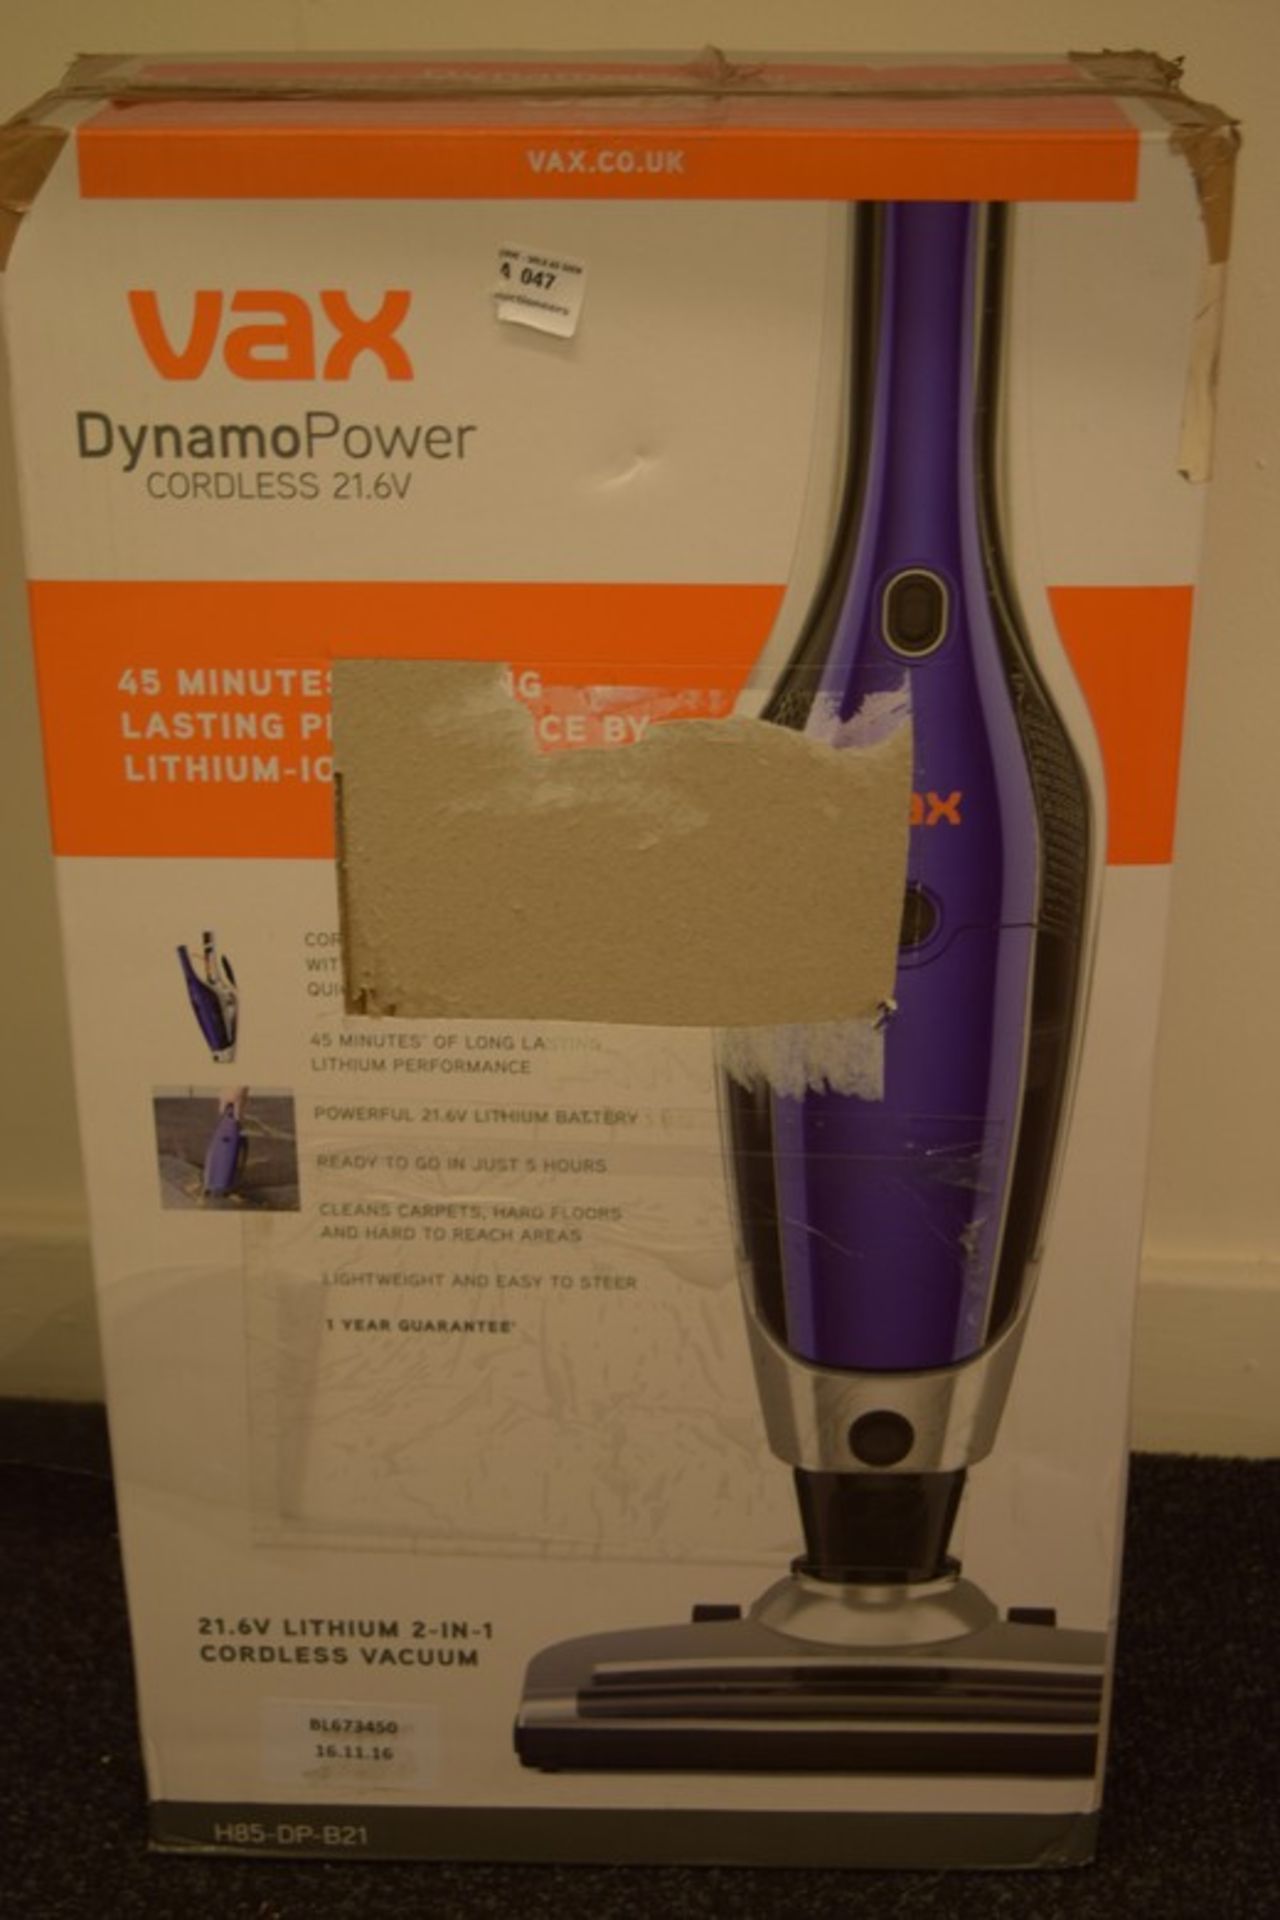 1 x BOXED VAX DYNAMO CORDLESS POWER VACUUM CLEANER RRP £120 16/11/16 *PLEASE NOTE THAT THE BID PRICE